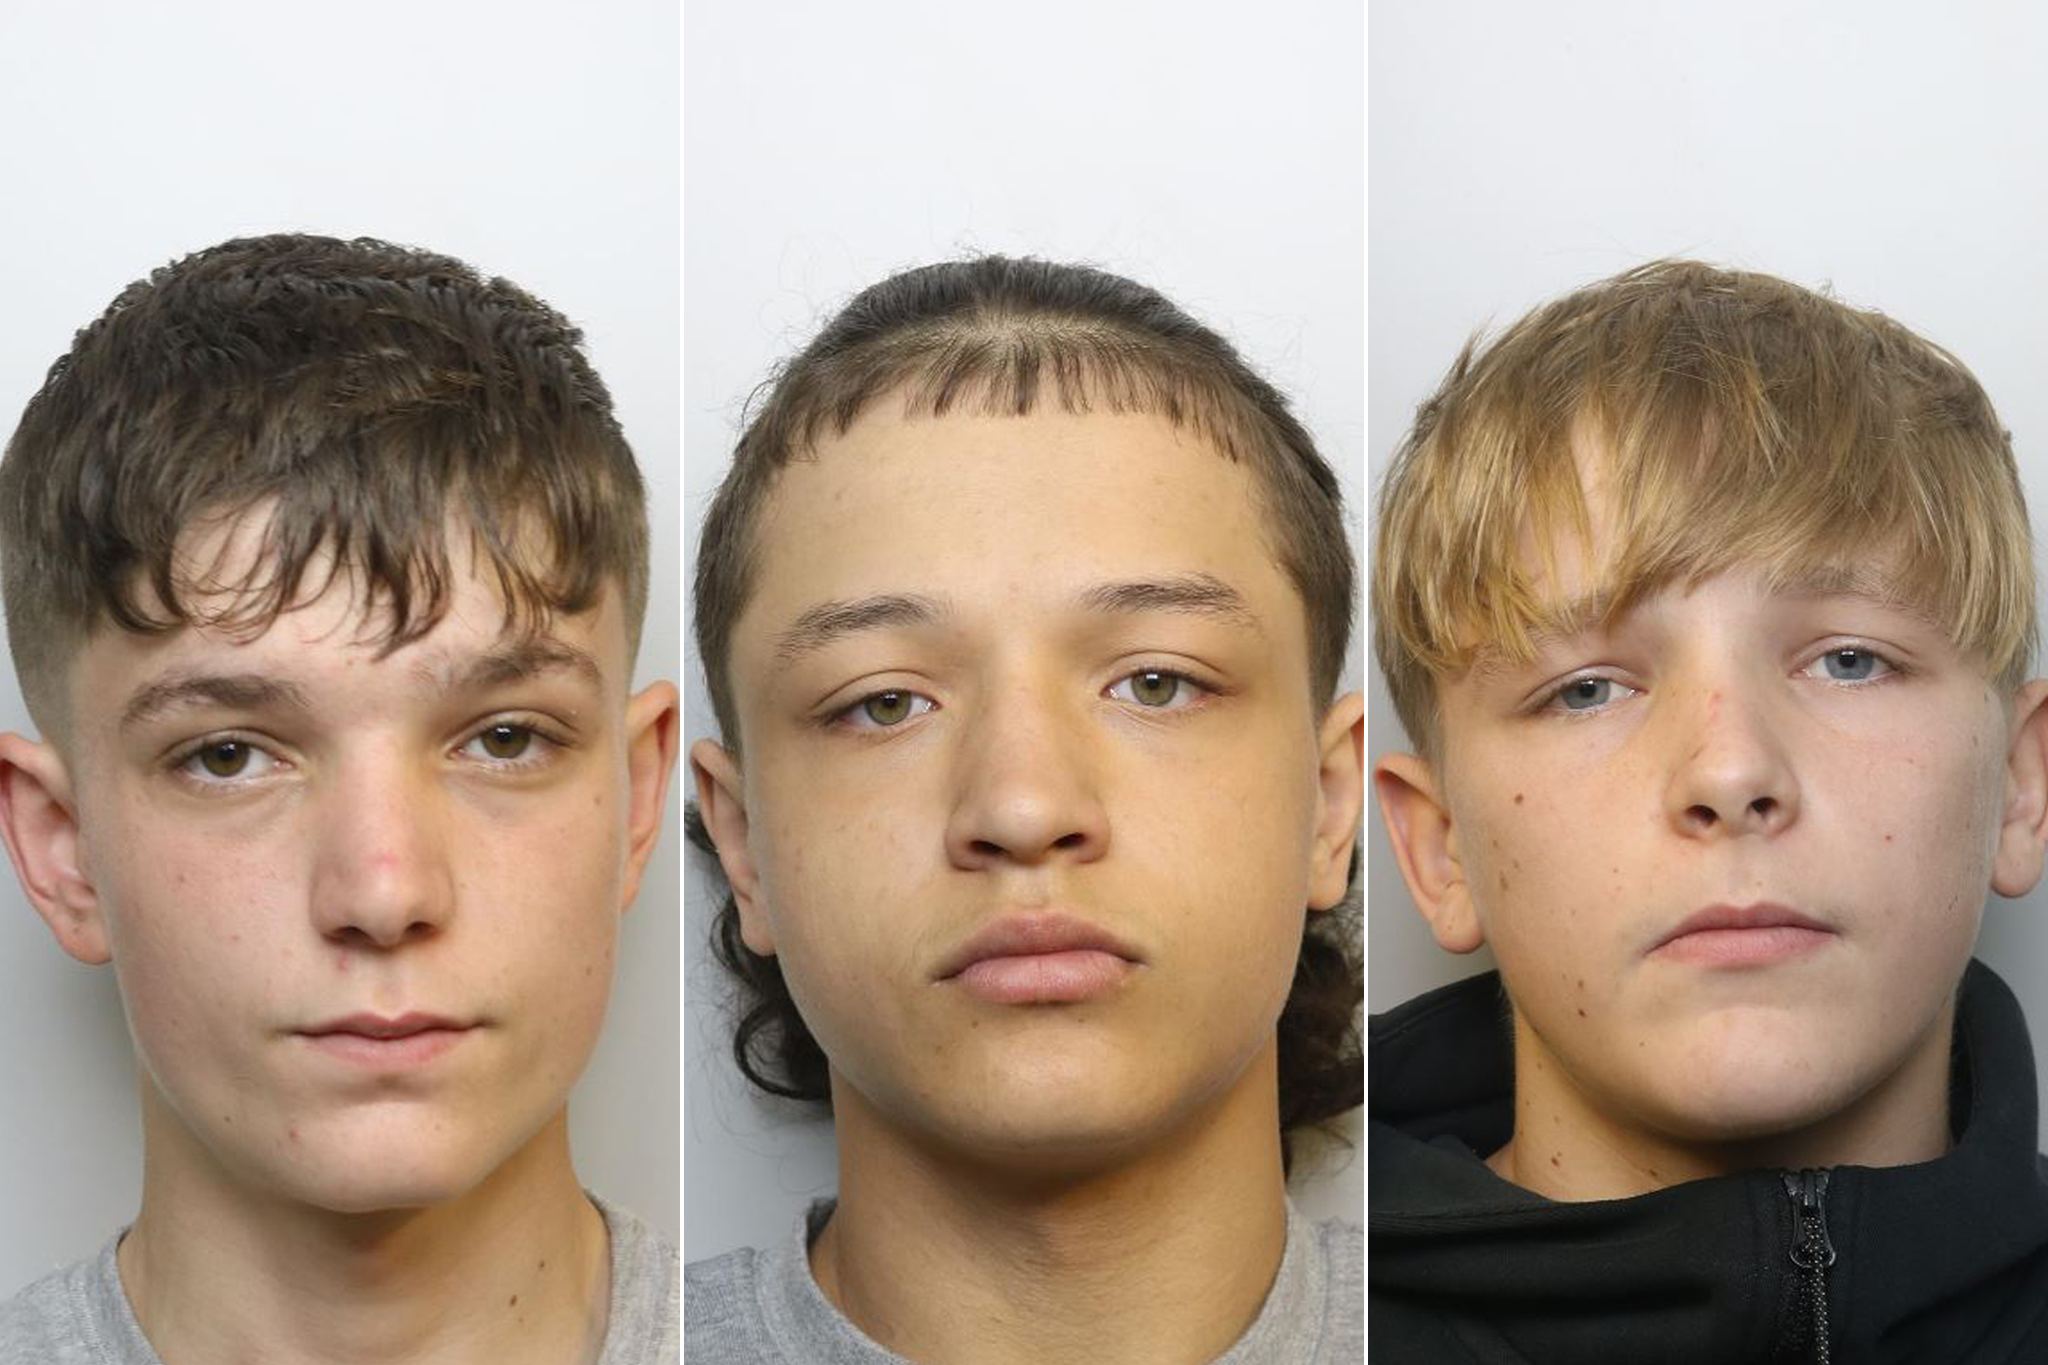 Shane Cunningham, Cartel Bushnell and Leo Knight (from left to right) were identified for the first time by a judge at Bristol Crown Court